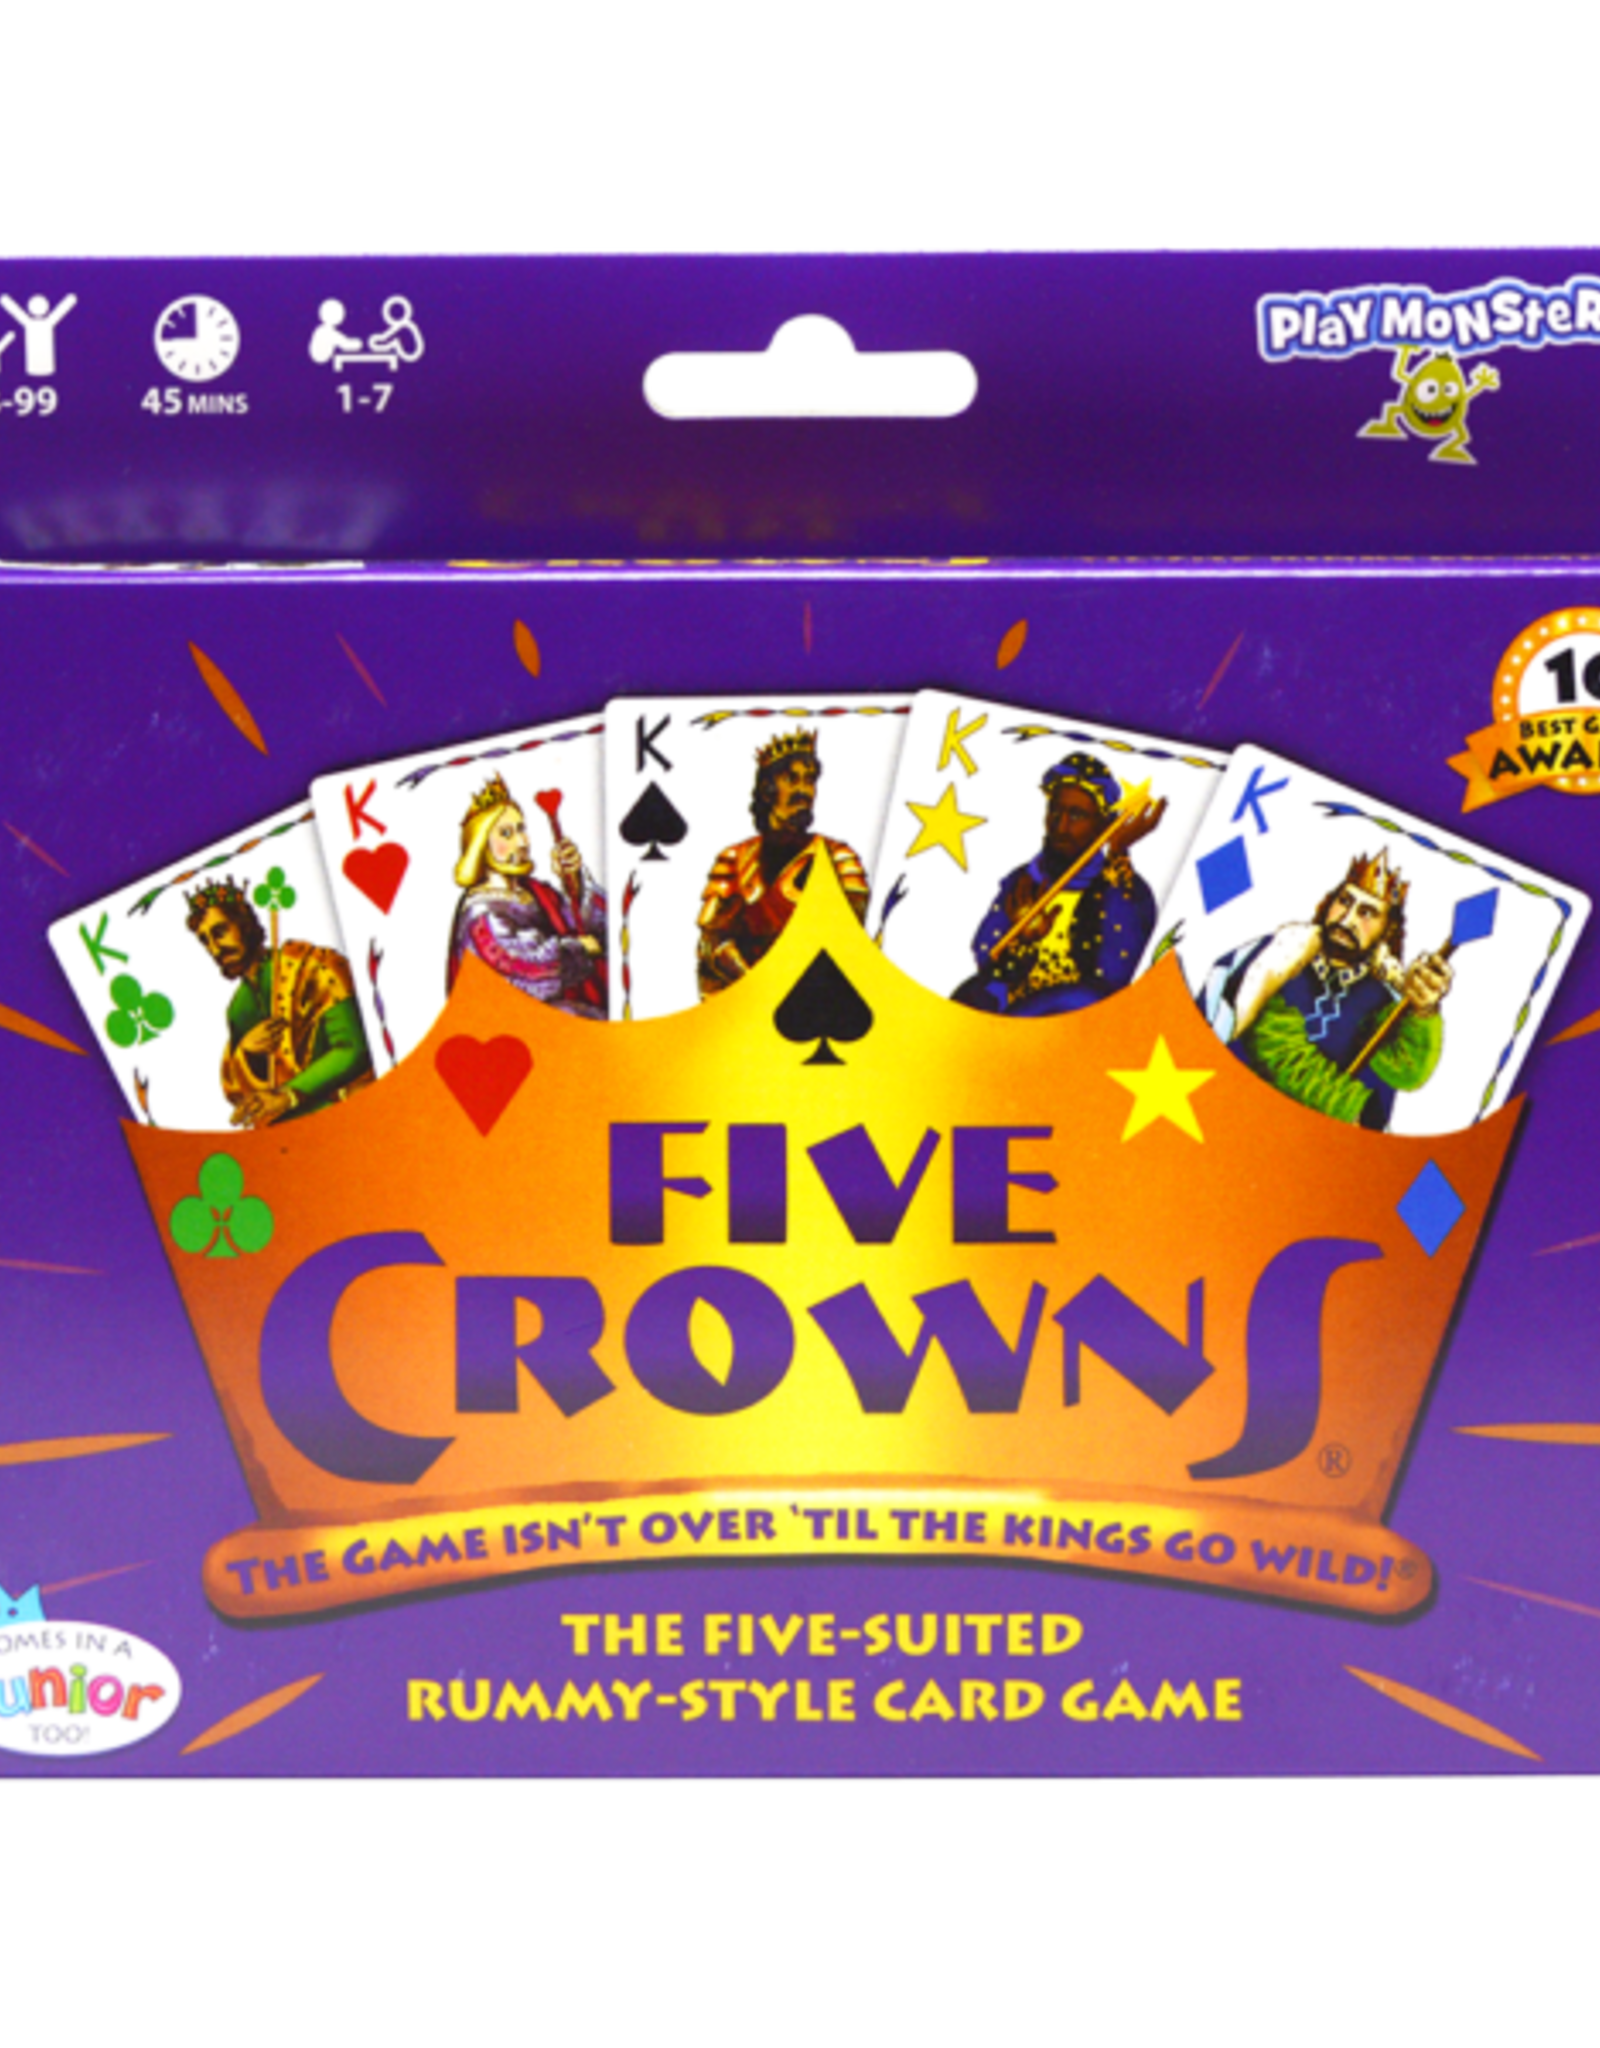 Play Monster Five Crowns Game